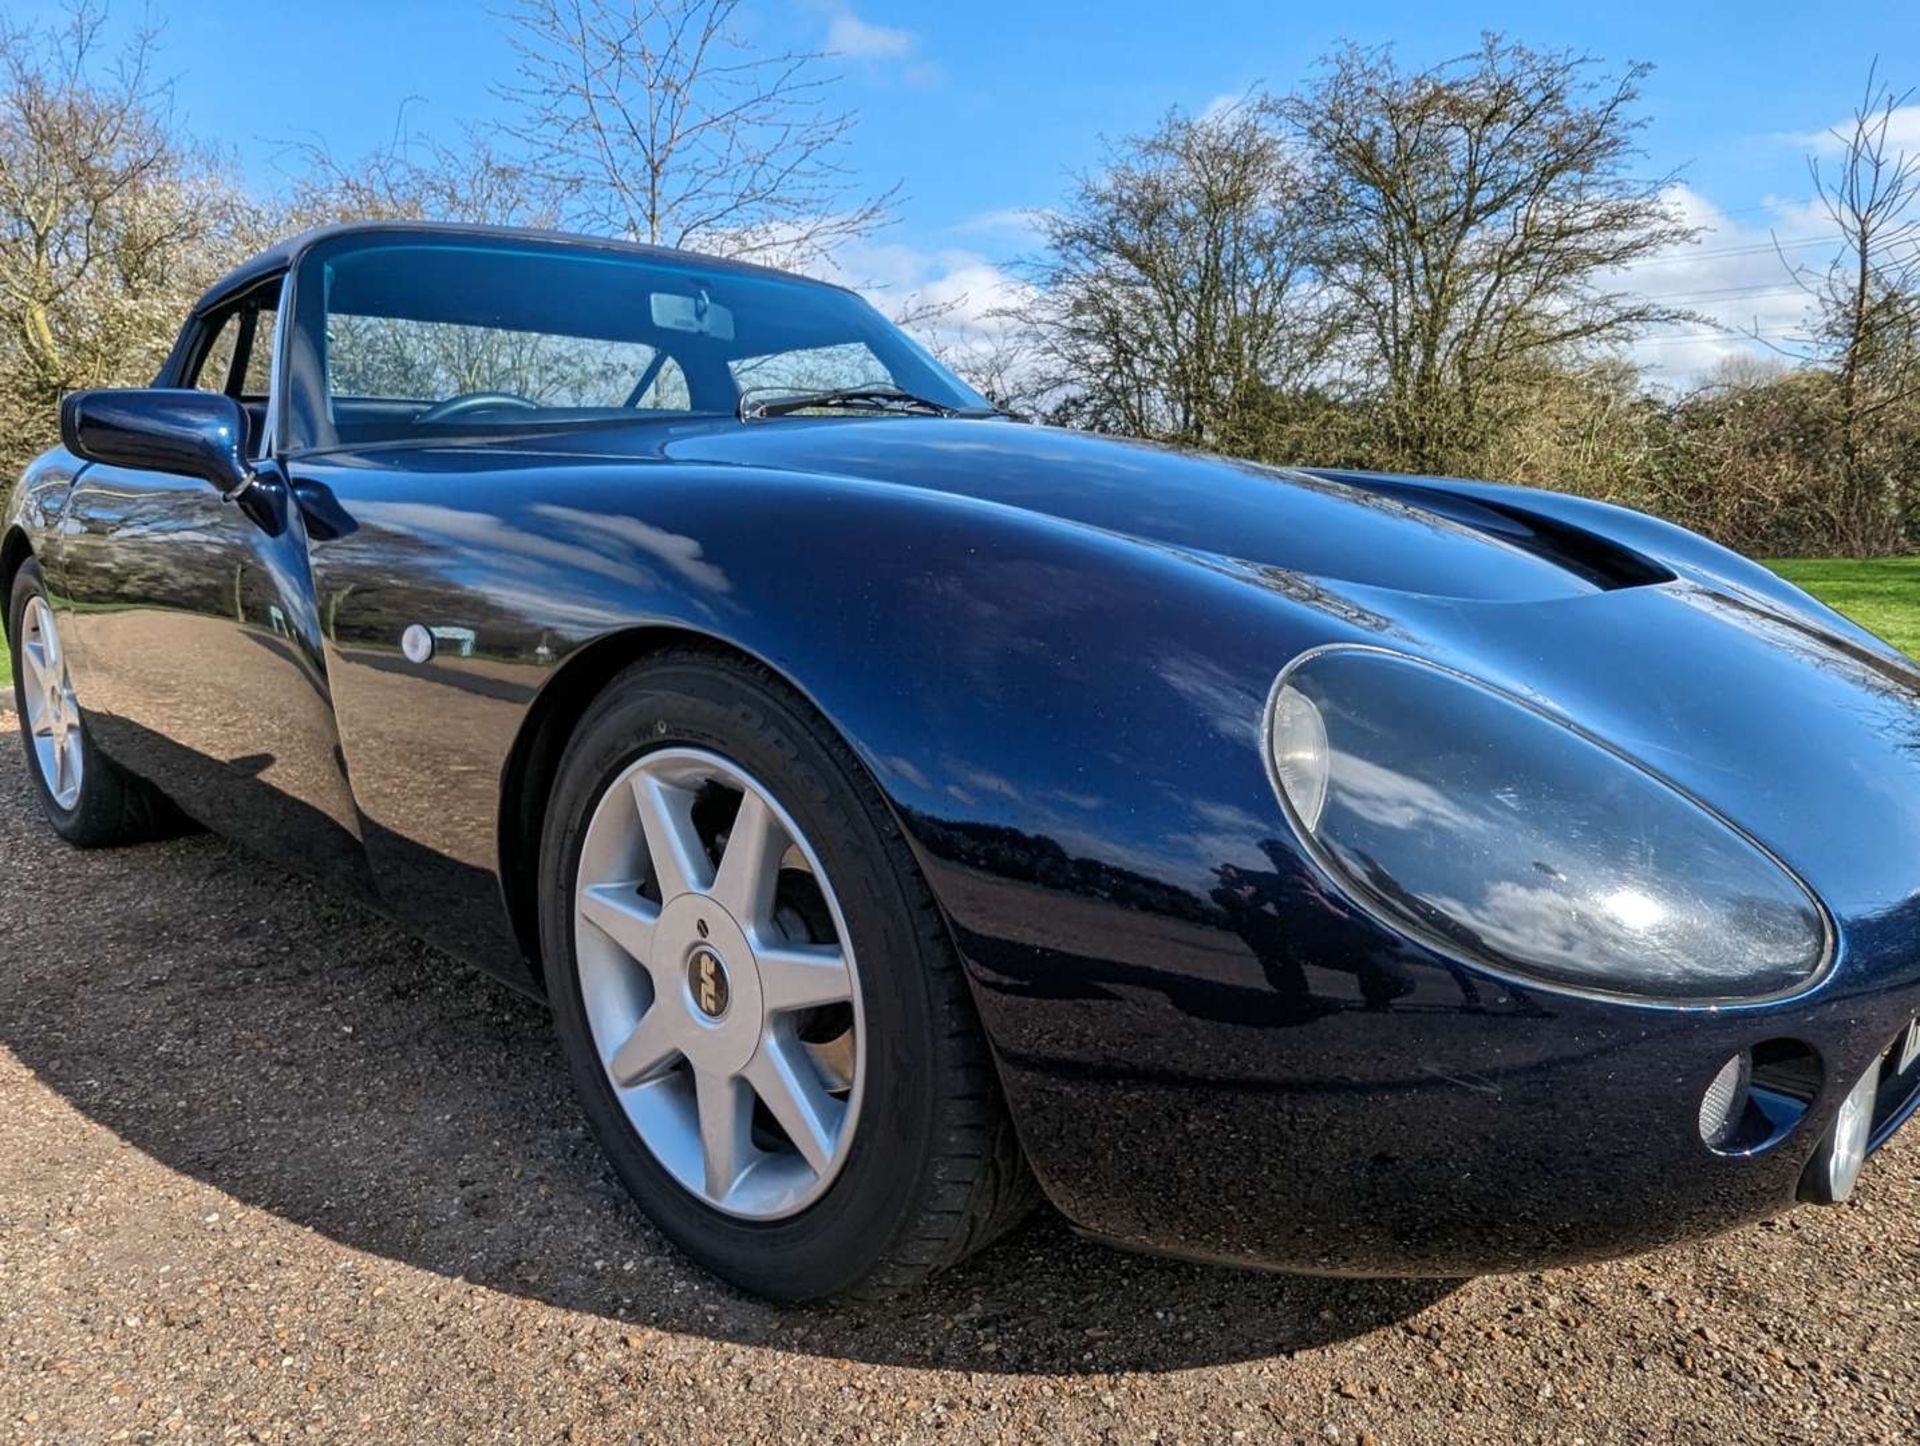 1997 TVR GRIFFITH 5.0 - Image 12 of 29